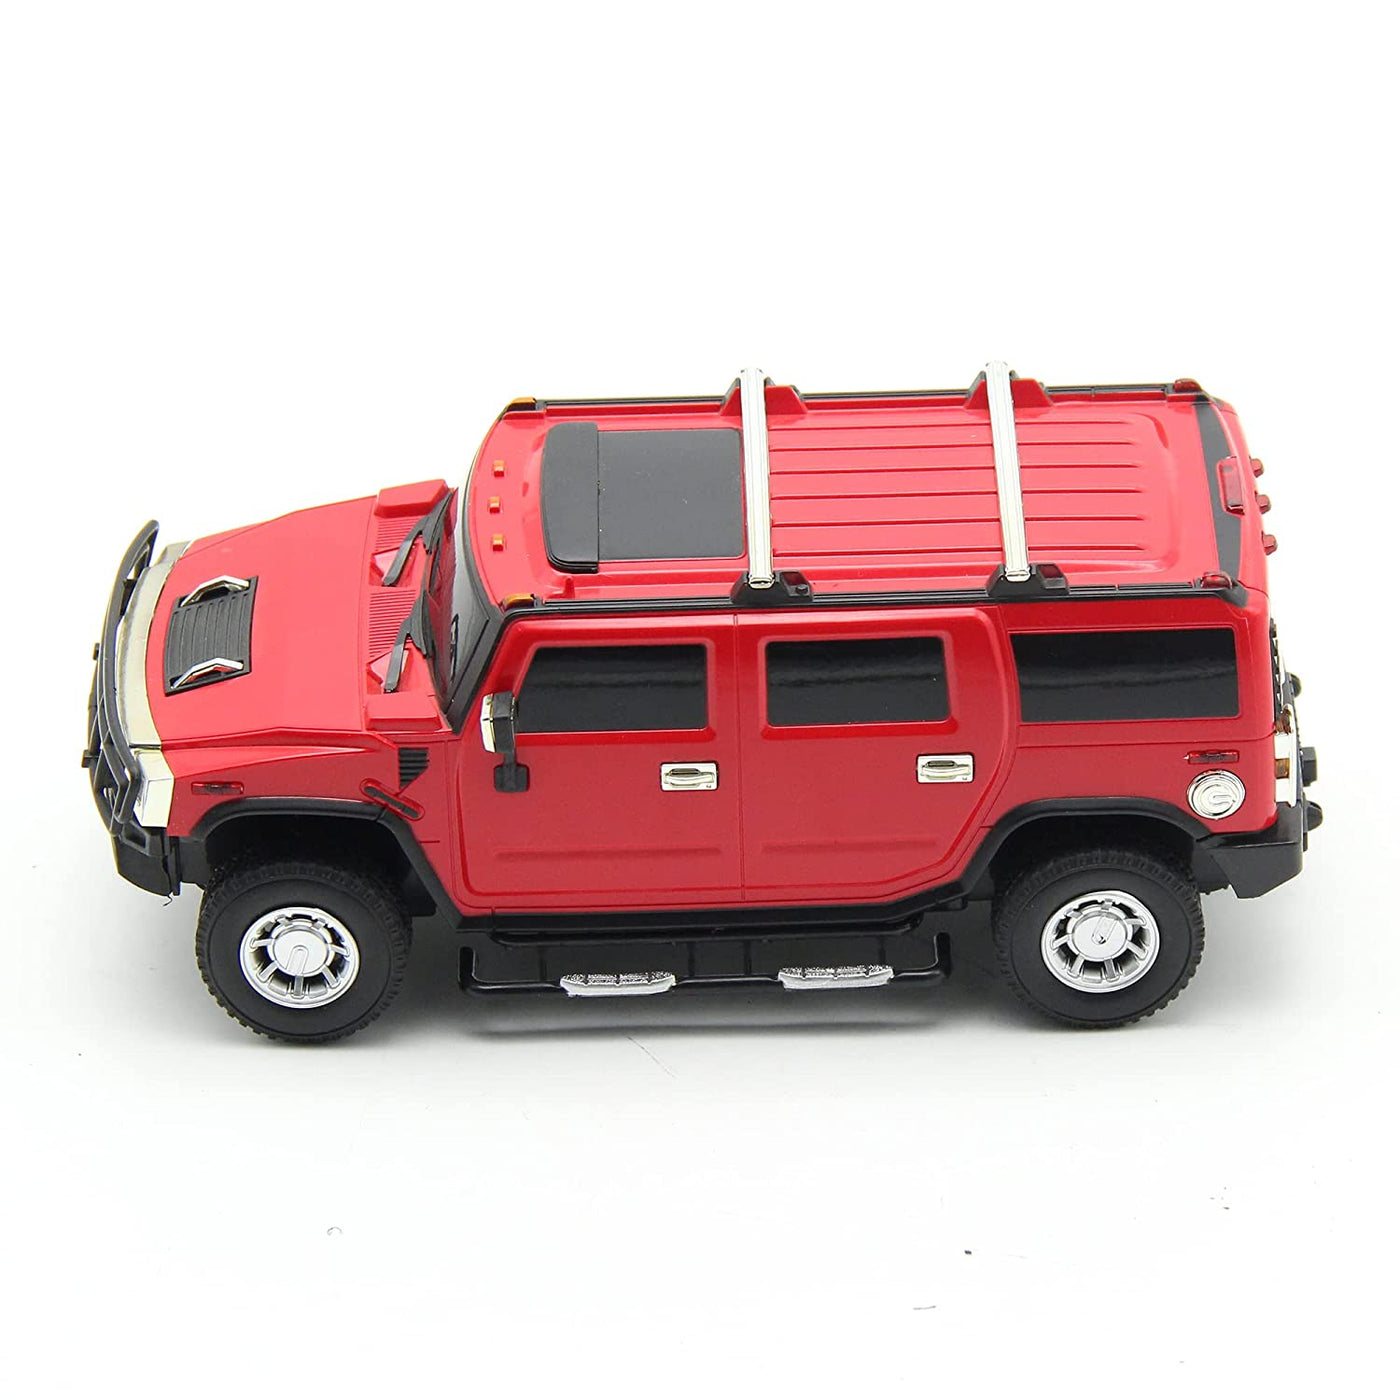 Army Vehicle RC Scale 1:24 - Red | Playzu